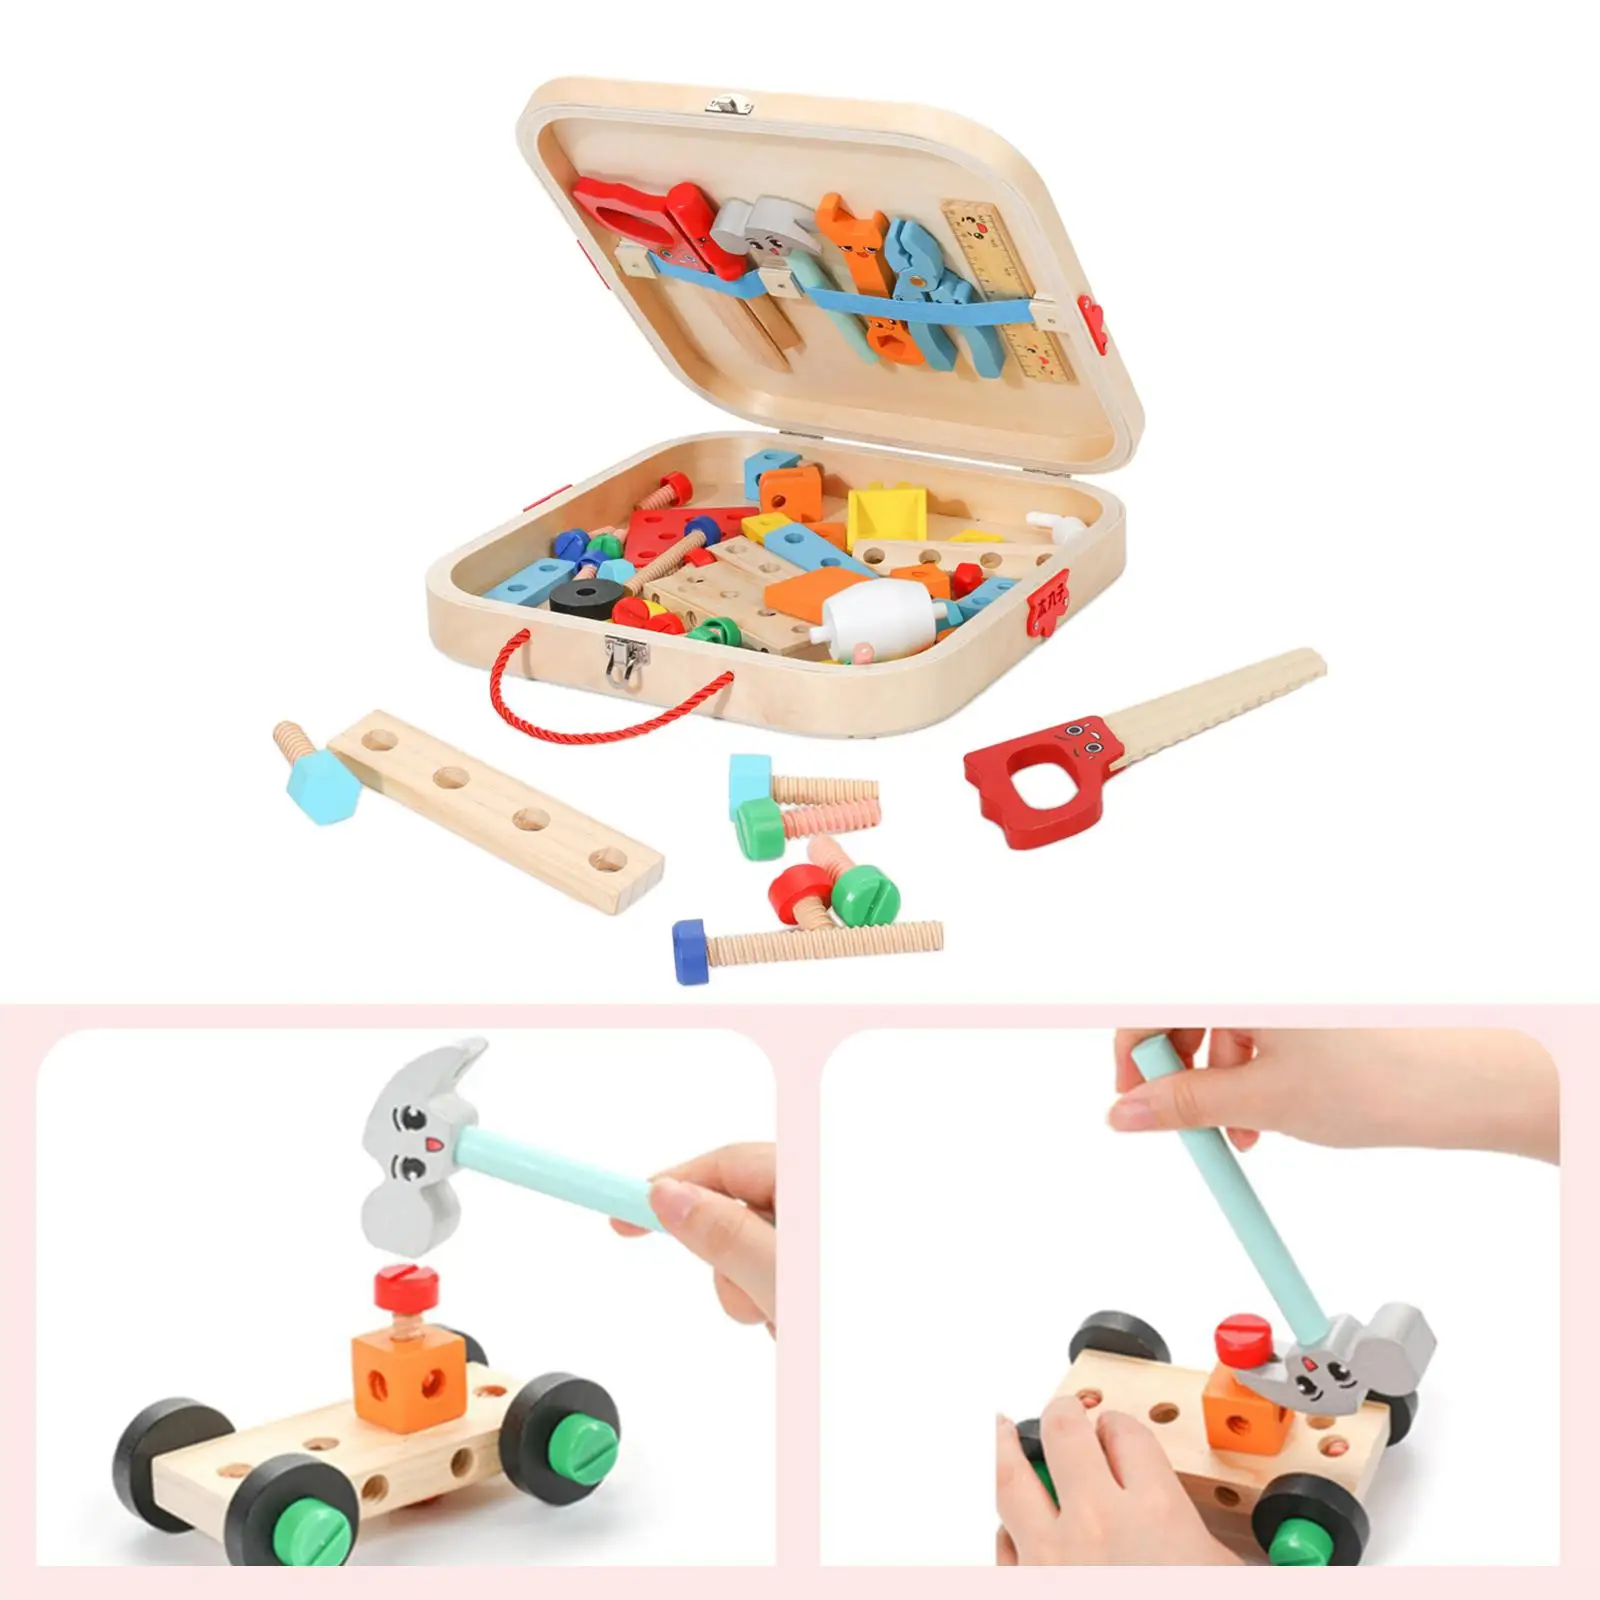 Wooden Kid Tool Set for Toddlers Develops Fine Motor Skills Multicolor Construction Tool Toy Set for Living Room Kids Toddlers